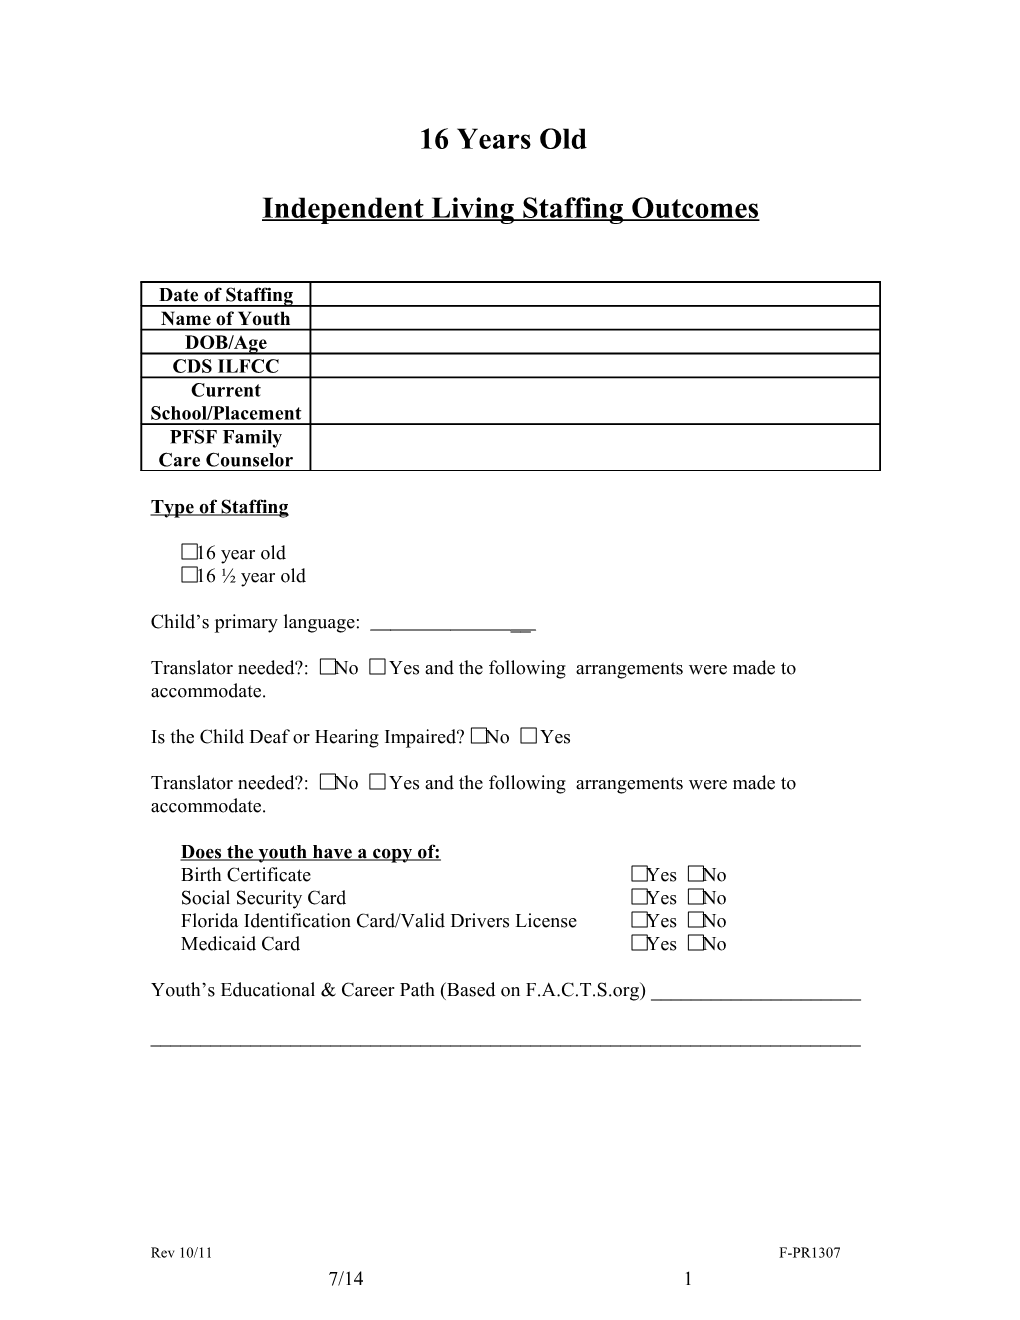 Independent Living Staffing Outcomes